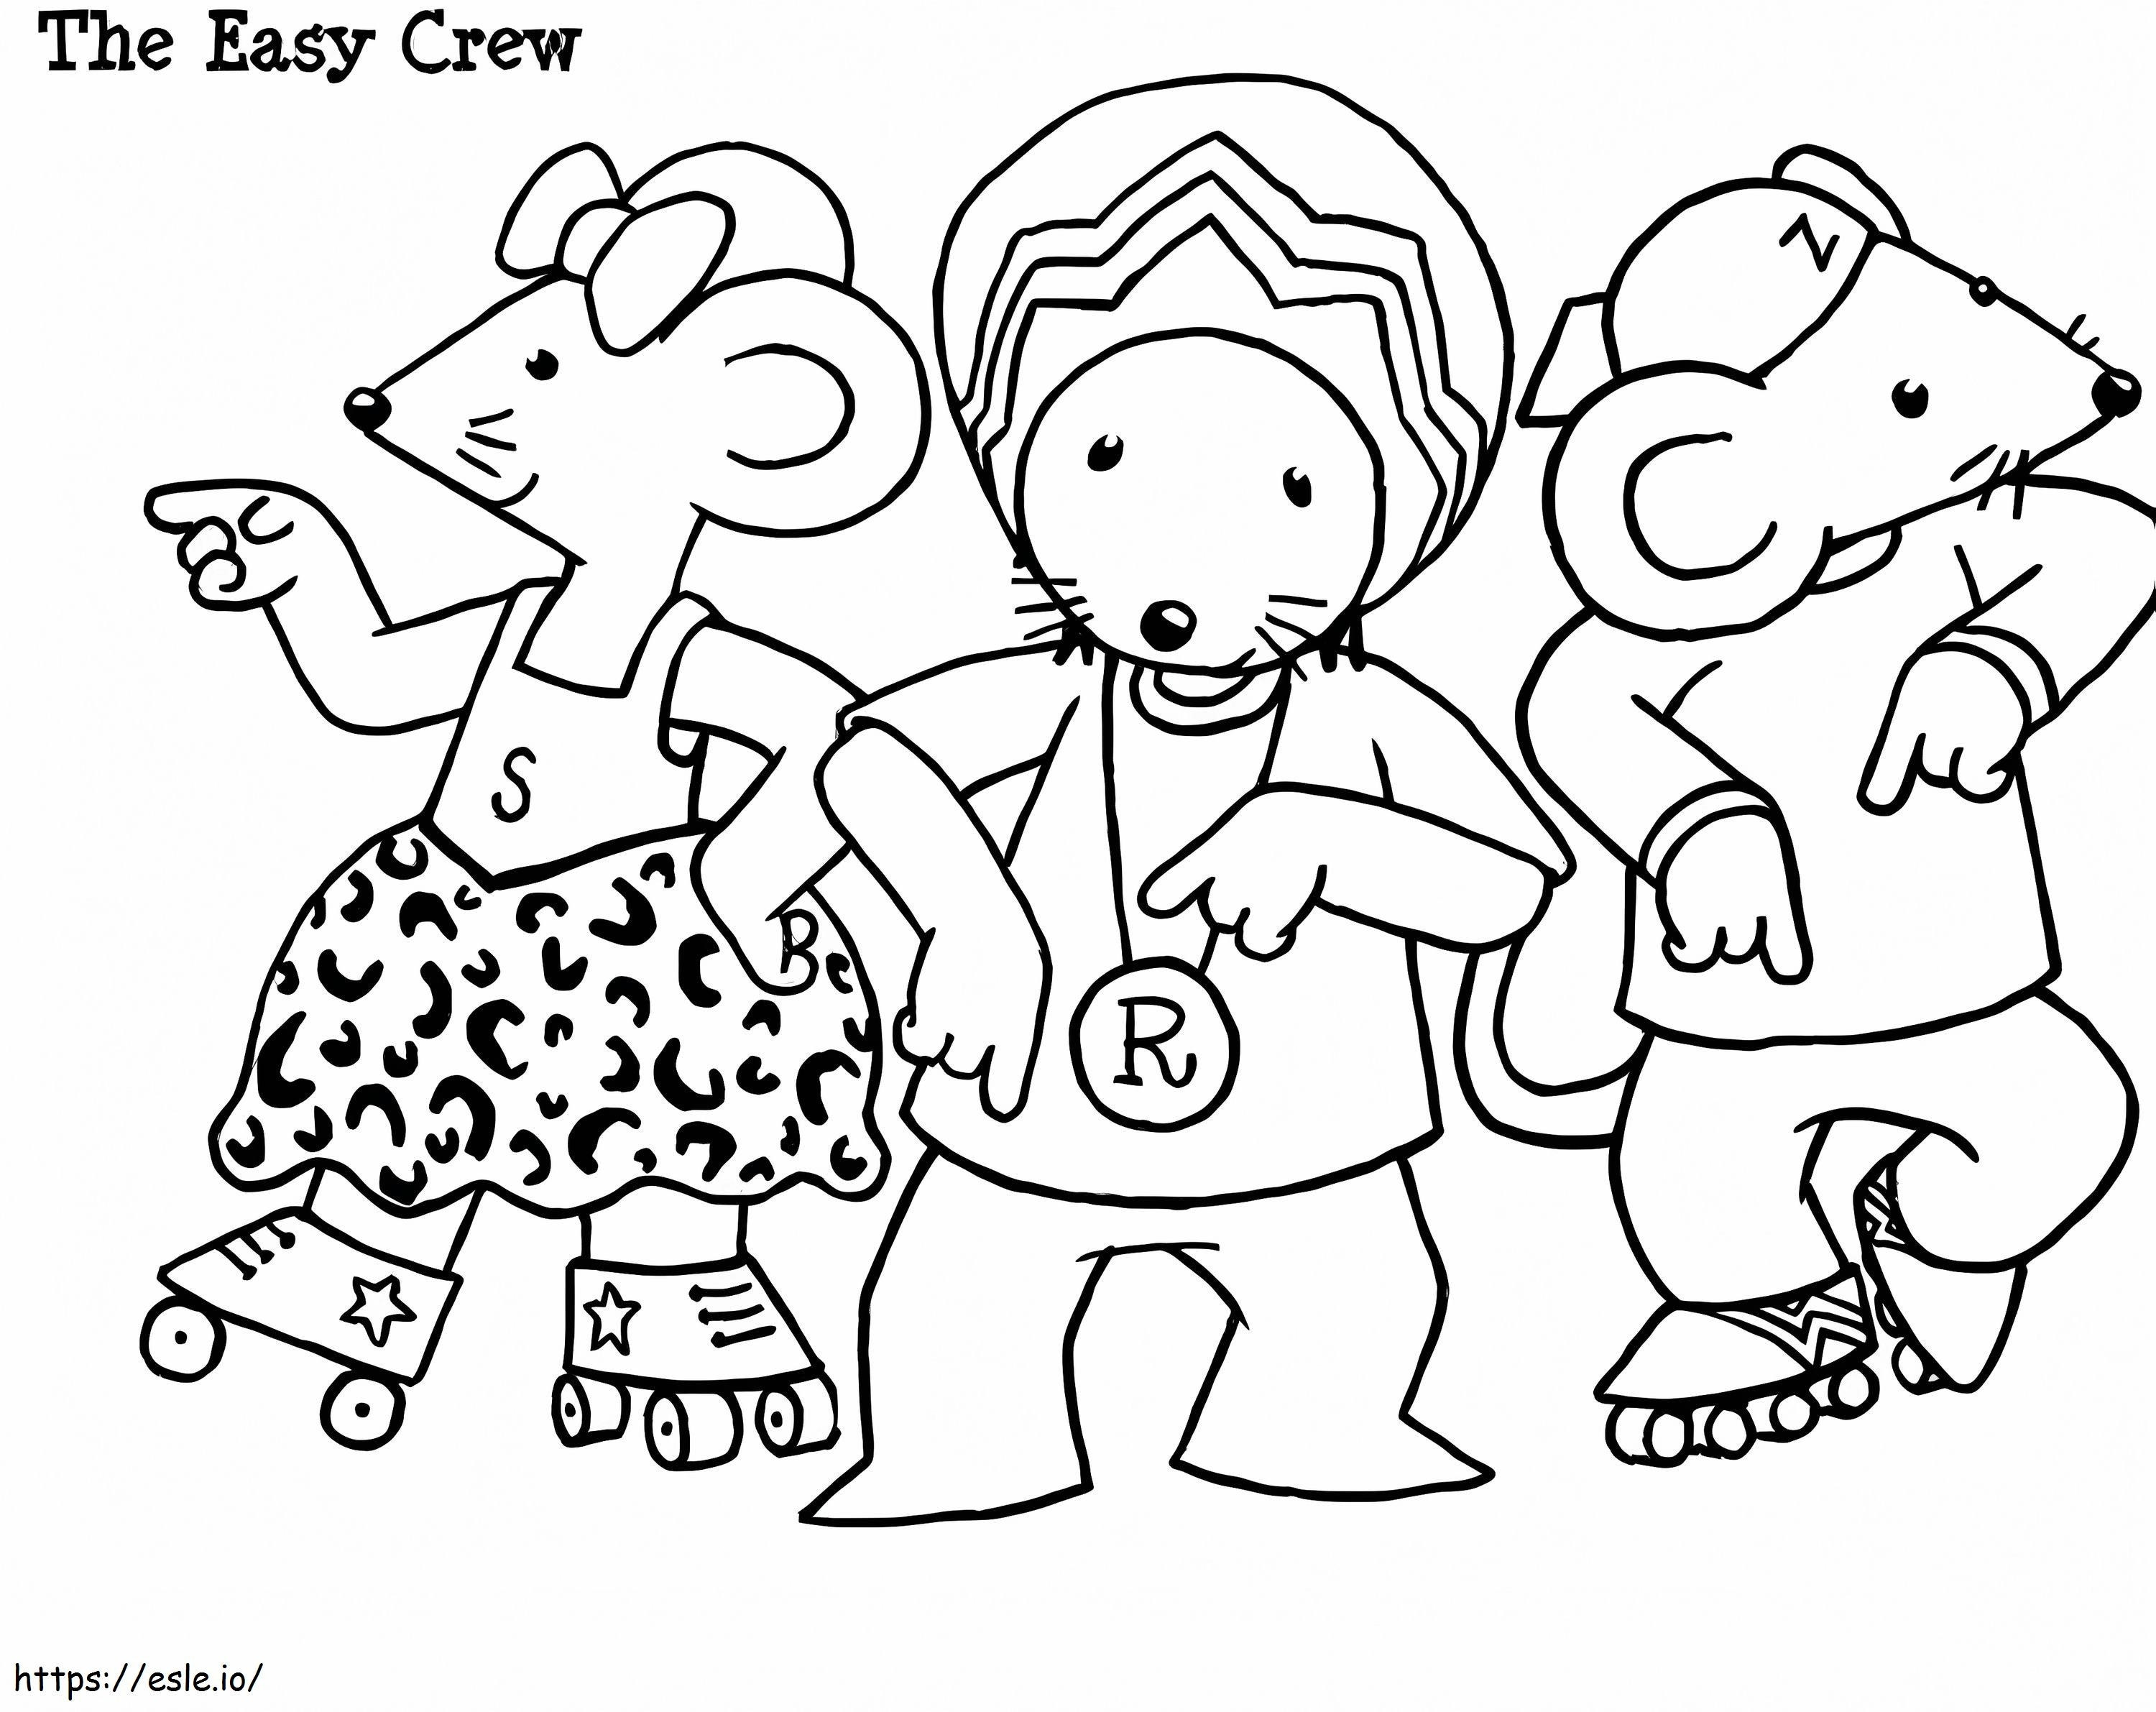 1582942720 Rastamouse 3 coloring page